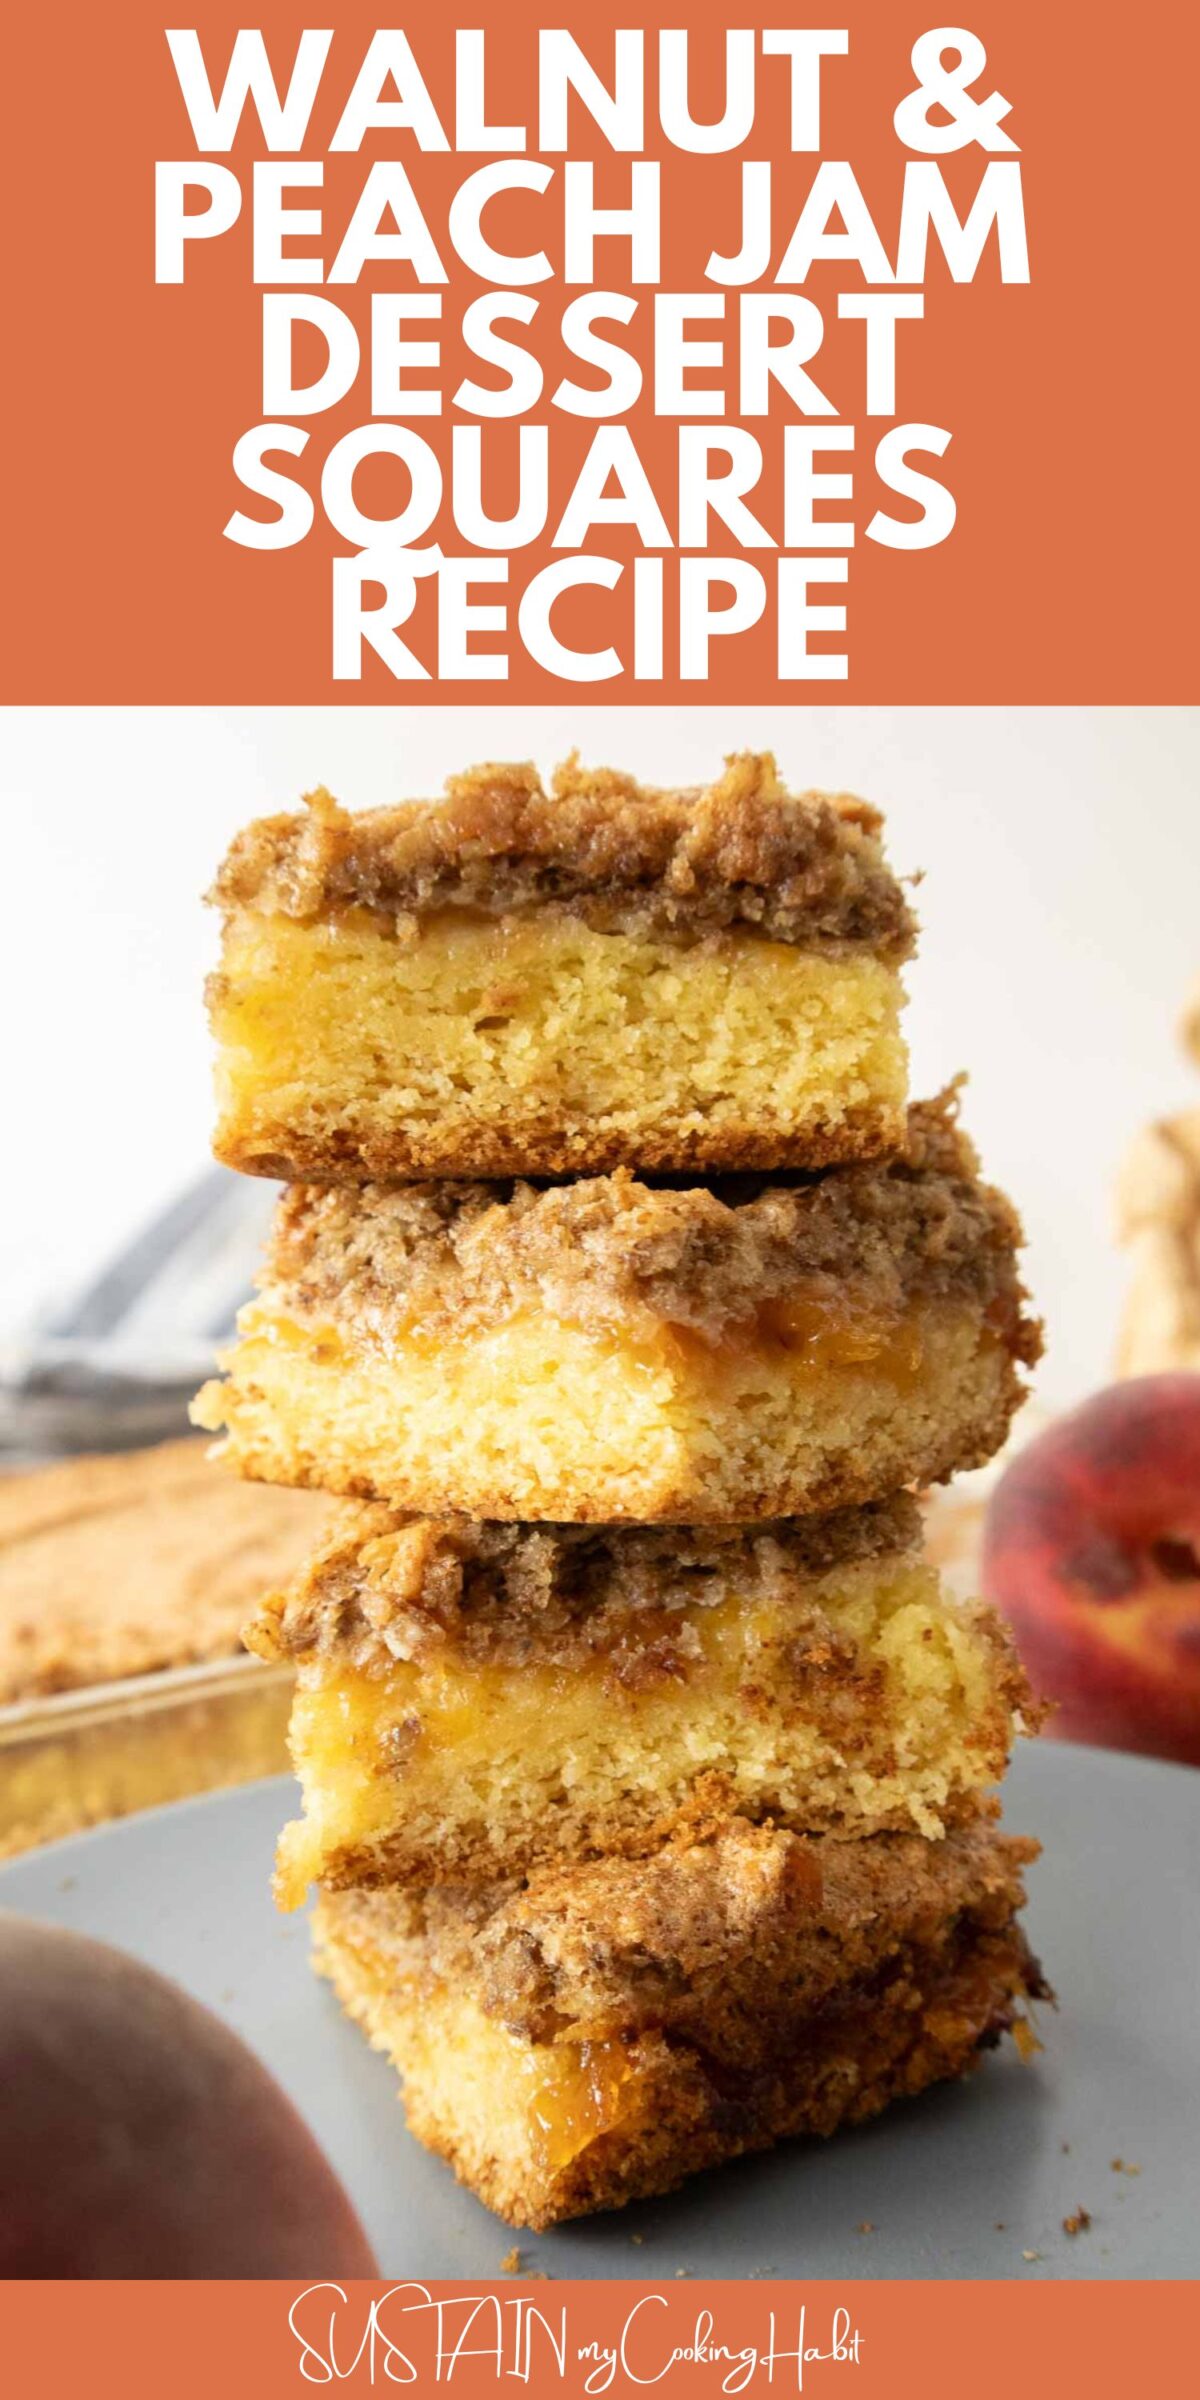 Stacked walnut and peach jam dessert squares with text overlay.